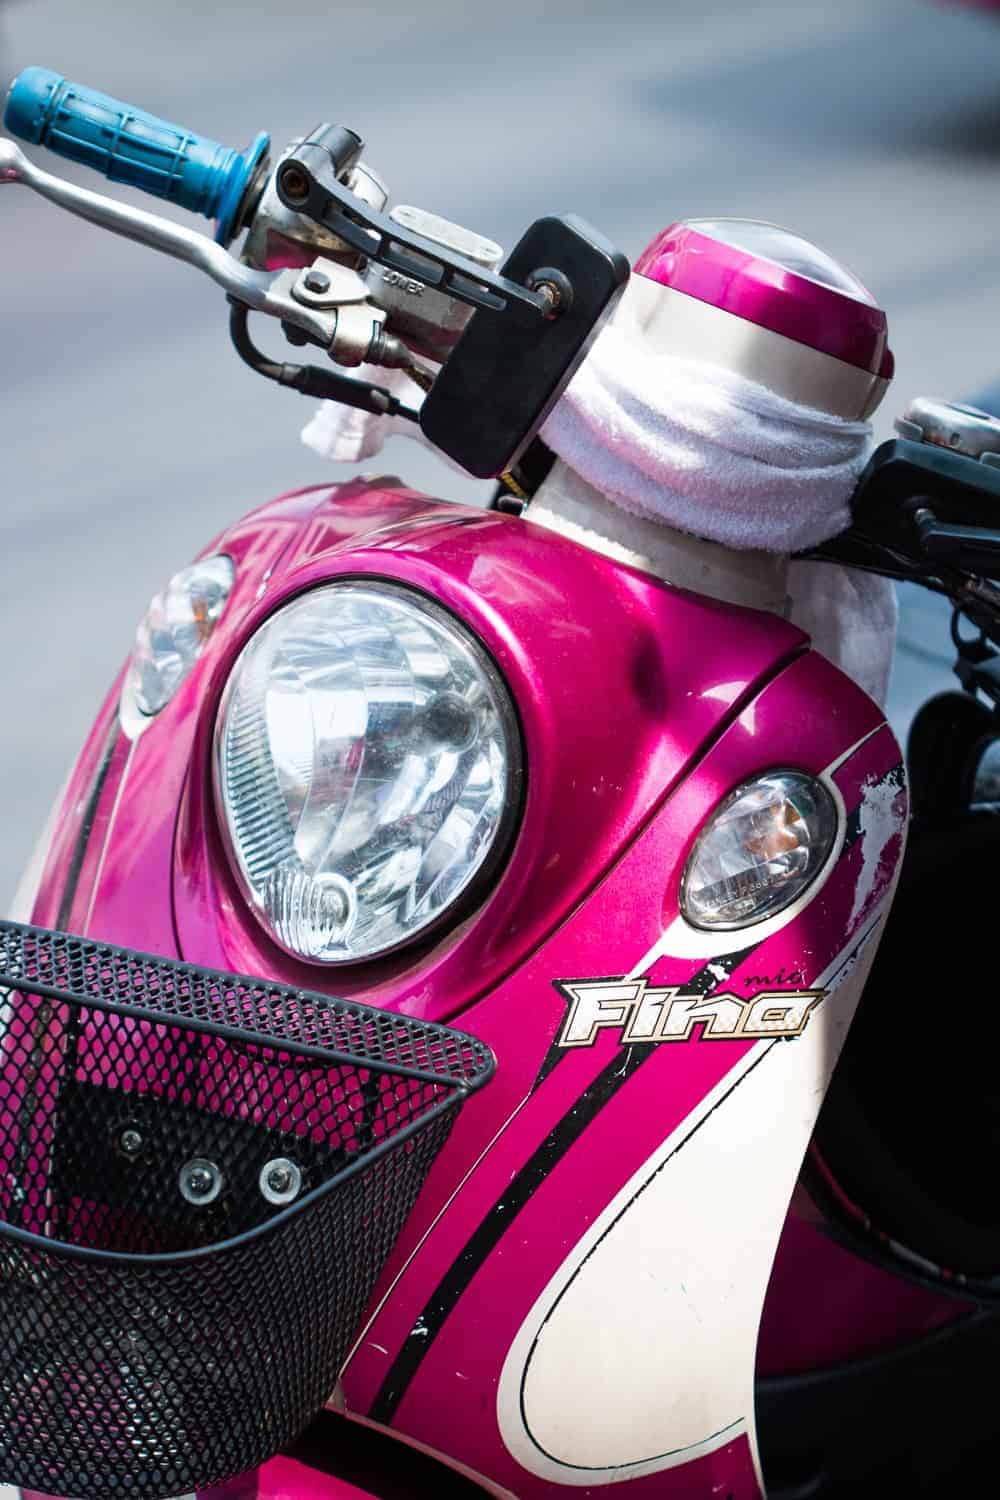 An image of a pink scooty